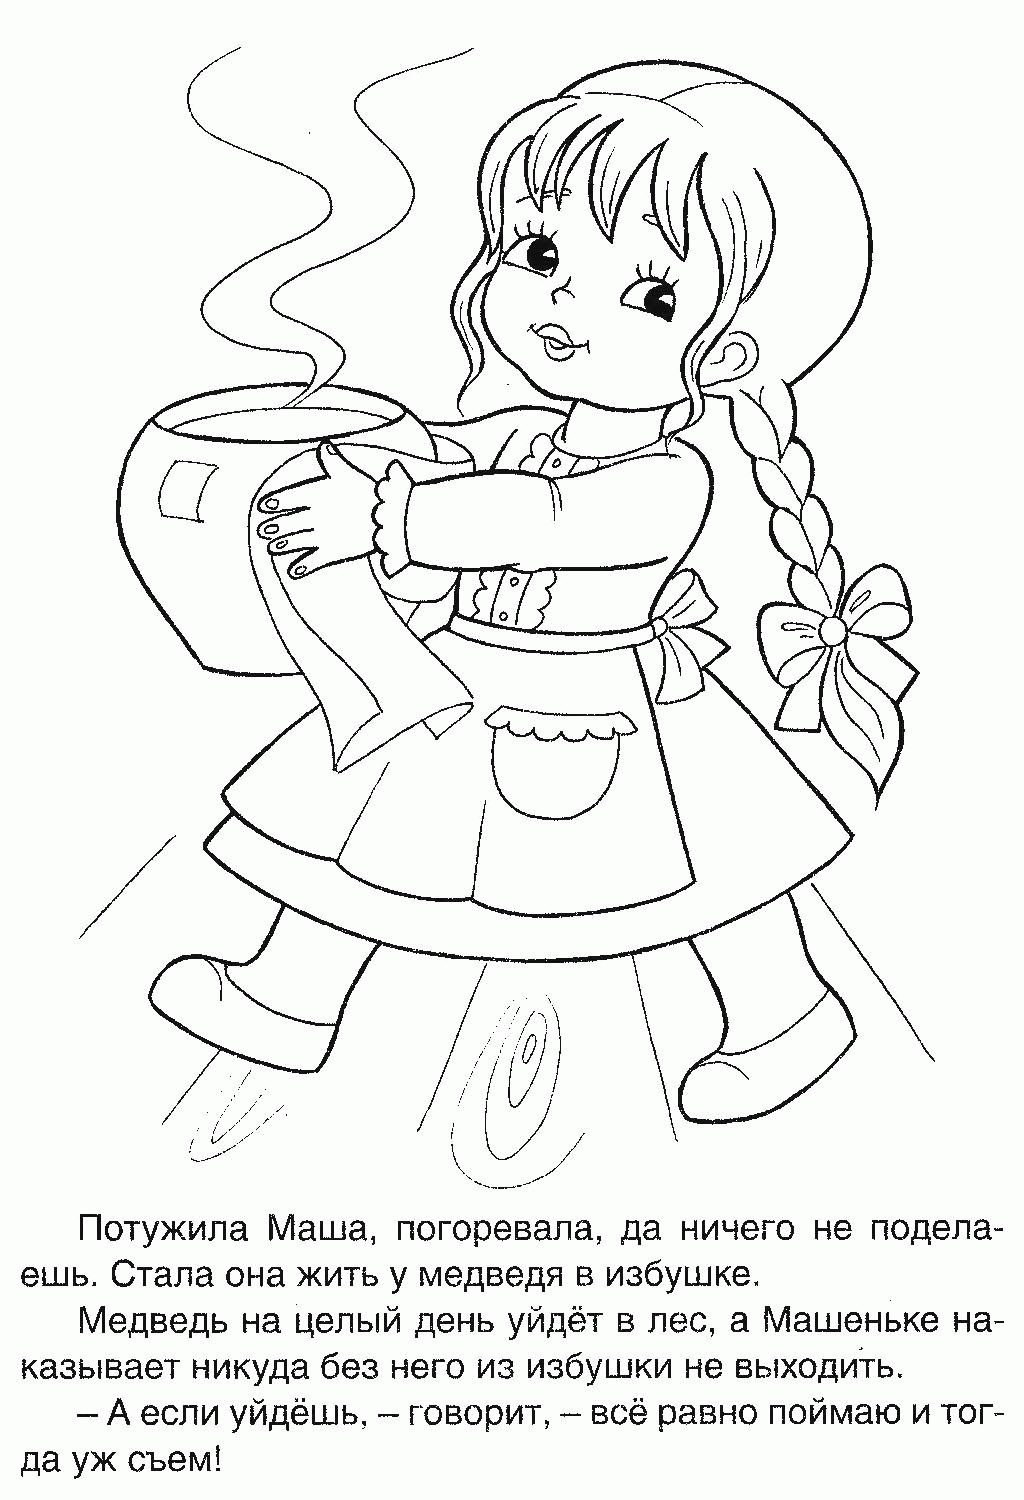 coloring pages to the tale Masha and the Bear Free Coloring pages ...